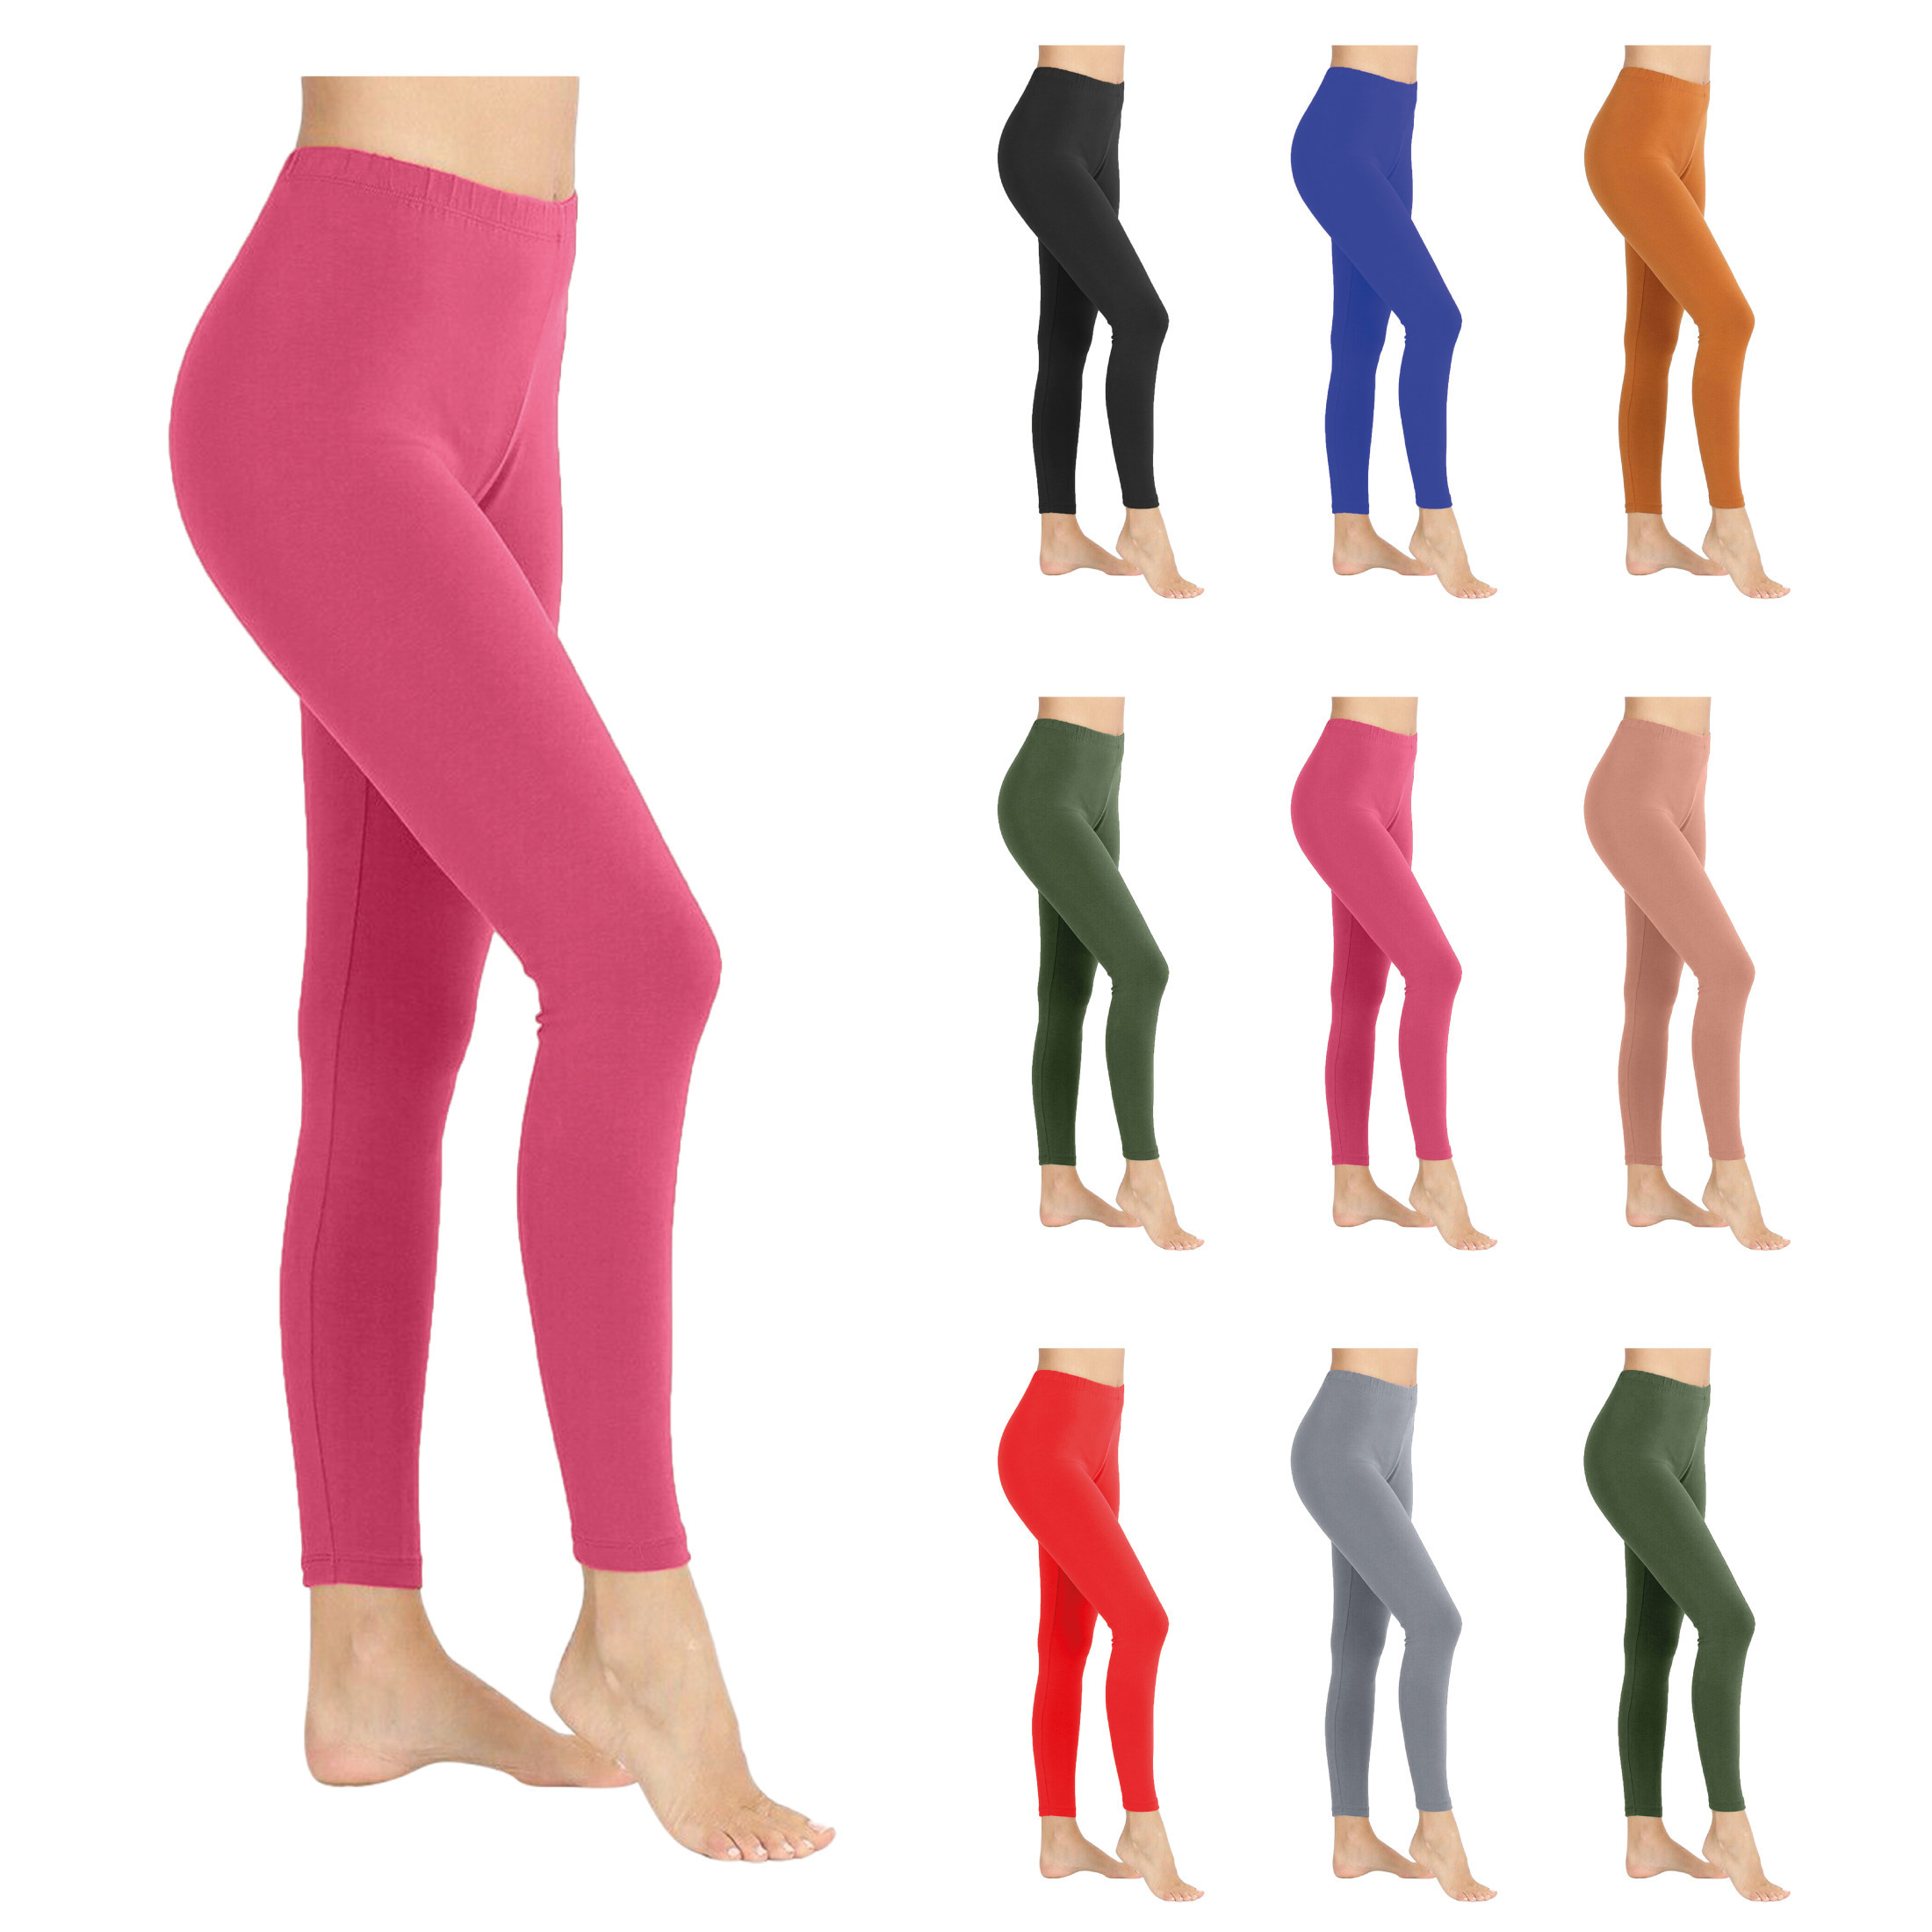 2-Pack: Ladies Solid High Waisted Soft Gym Yoga Sports Yummy Leggings - X-Large